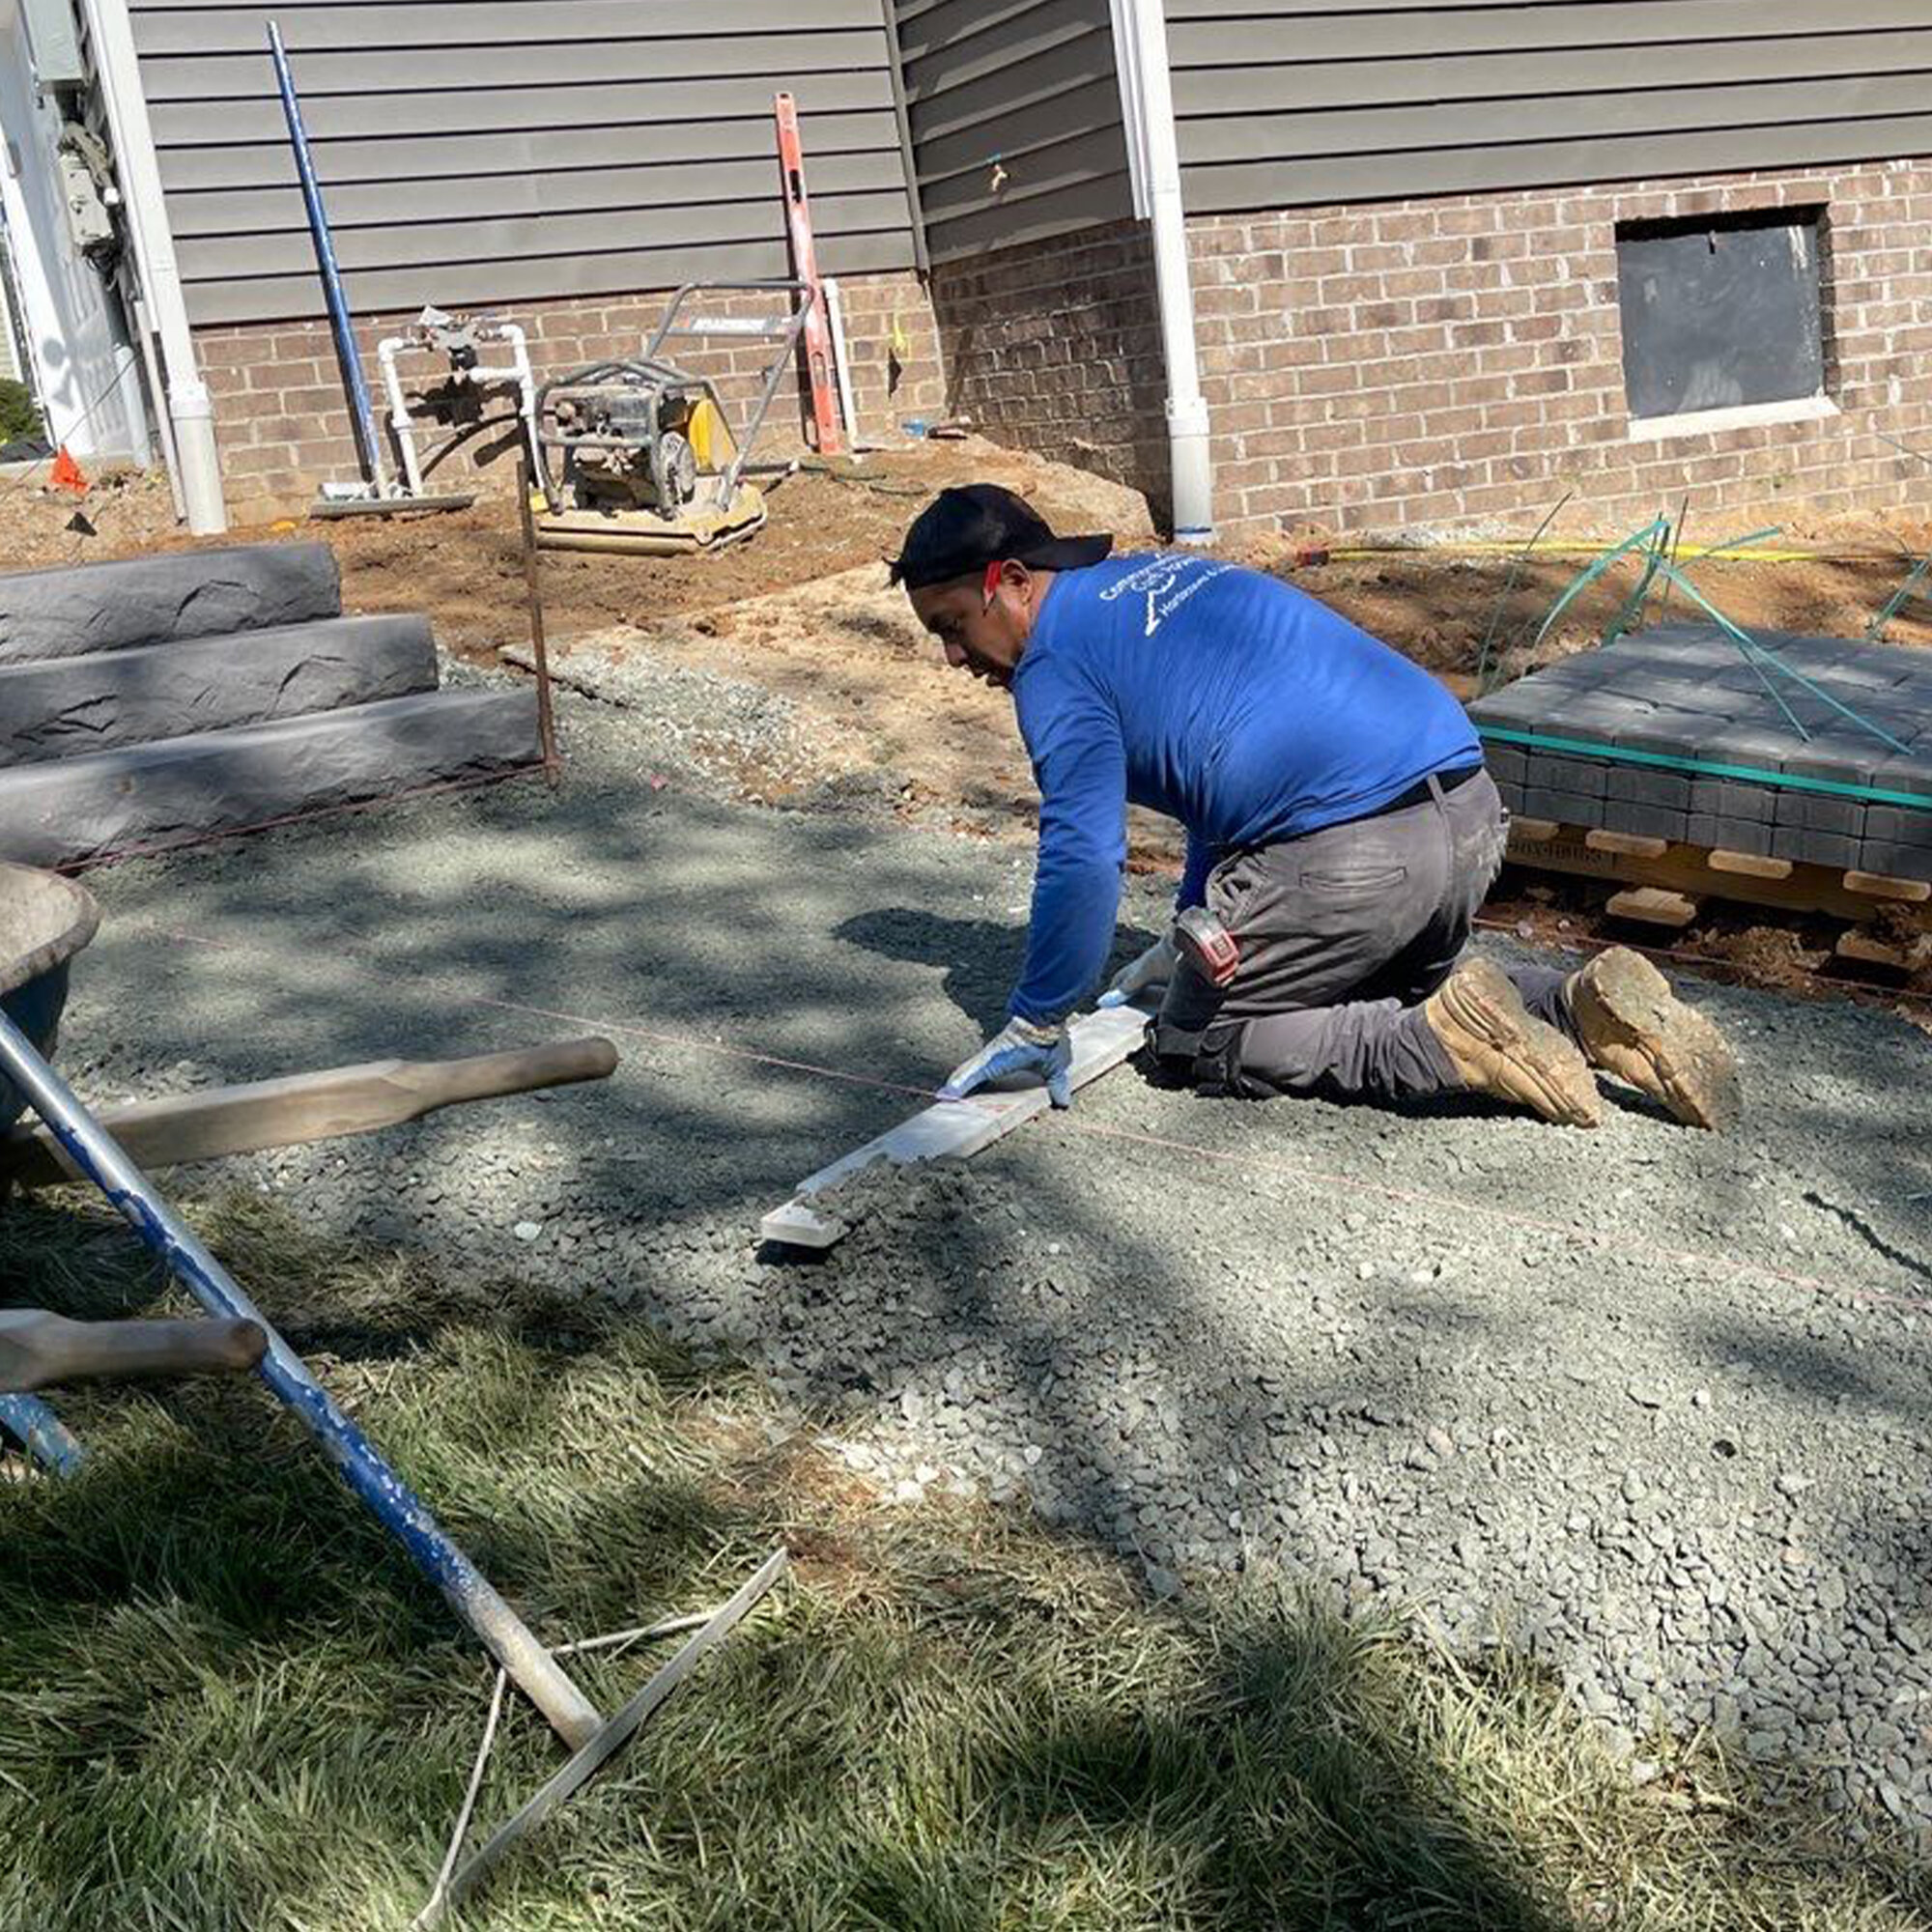 Laying the path to paradise
.
.
.
#rvahomes #midlothianva #rva #ccaway #homeinspiration #outdoorlivingspace